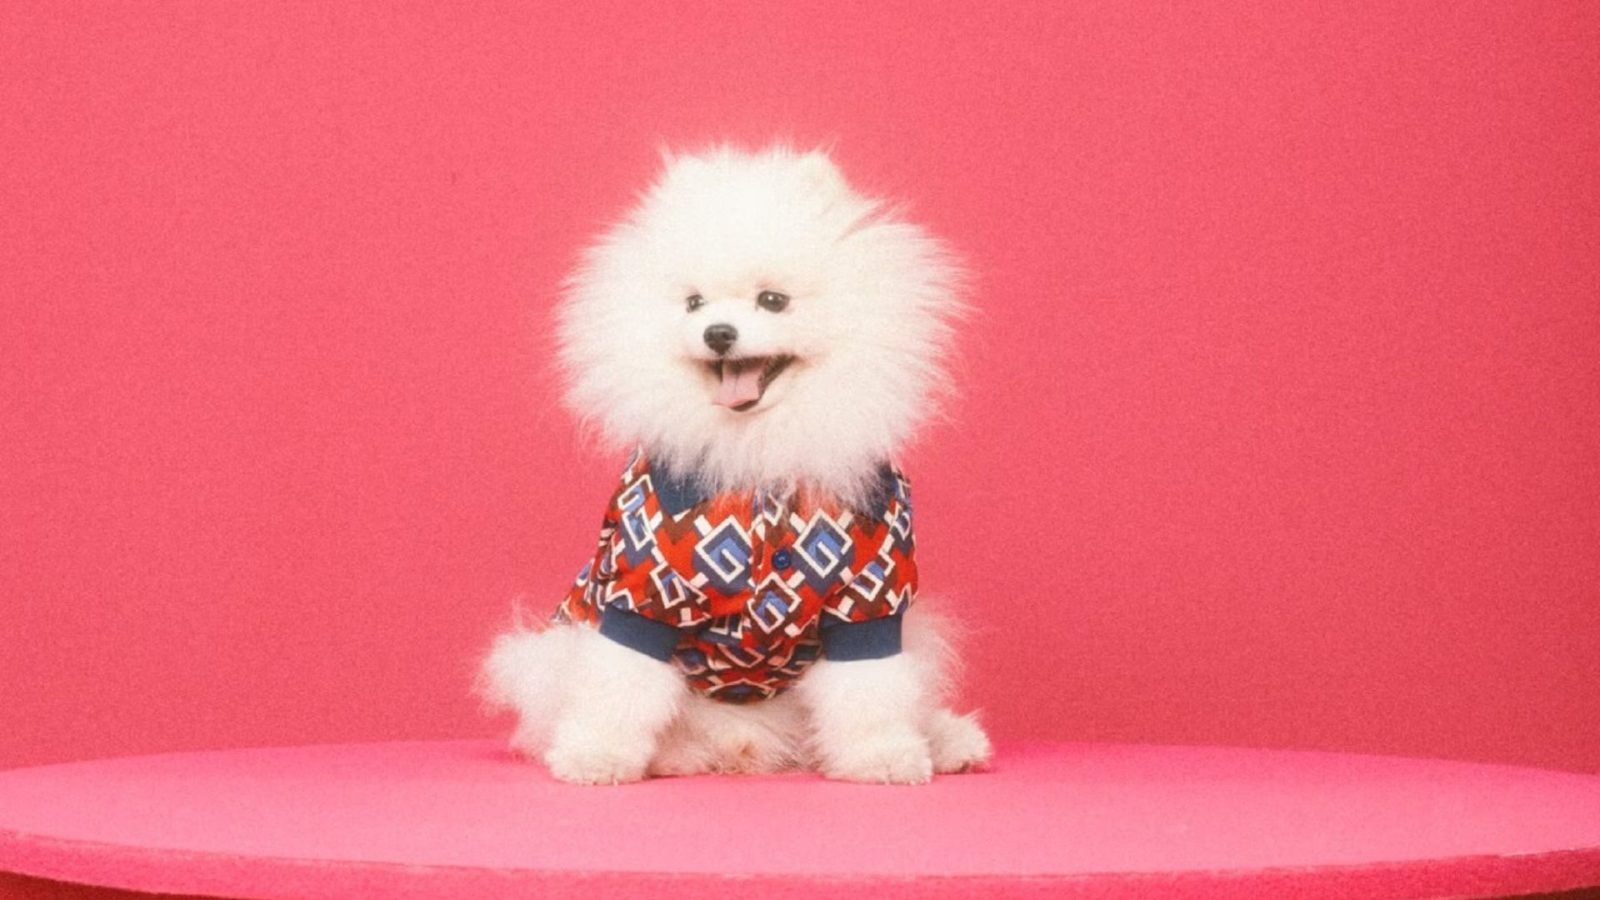 Gucci releases its first pet collection featuring stylish clothes and accessories